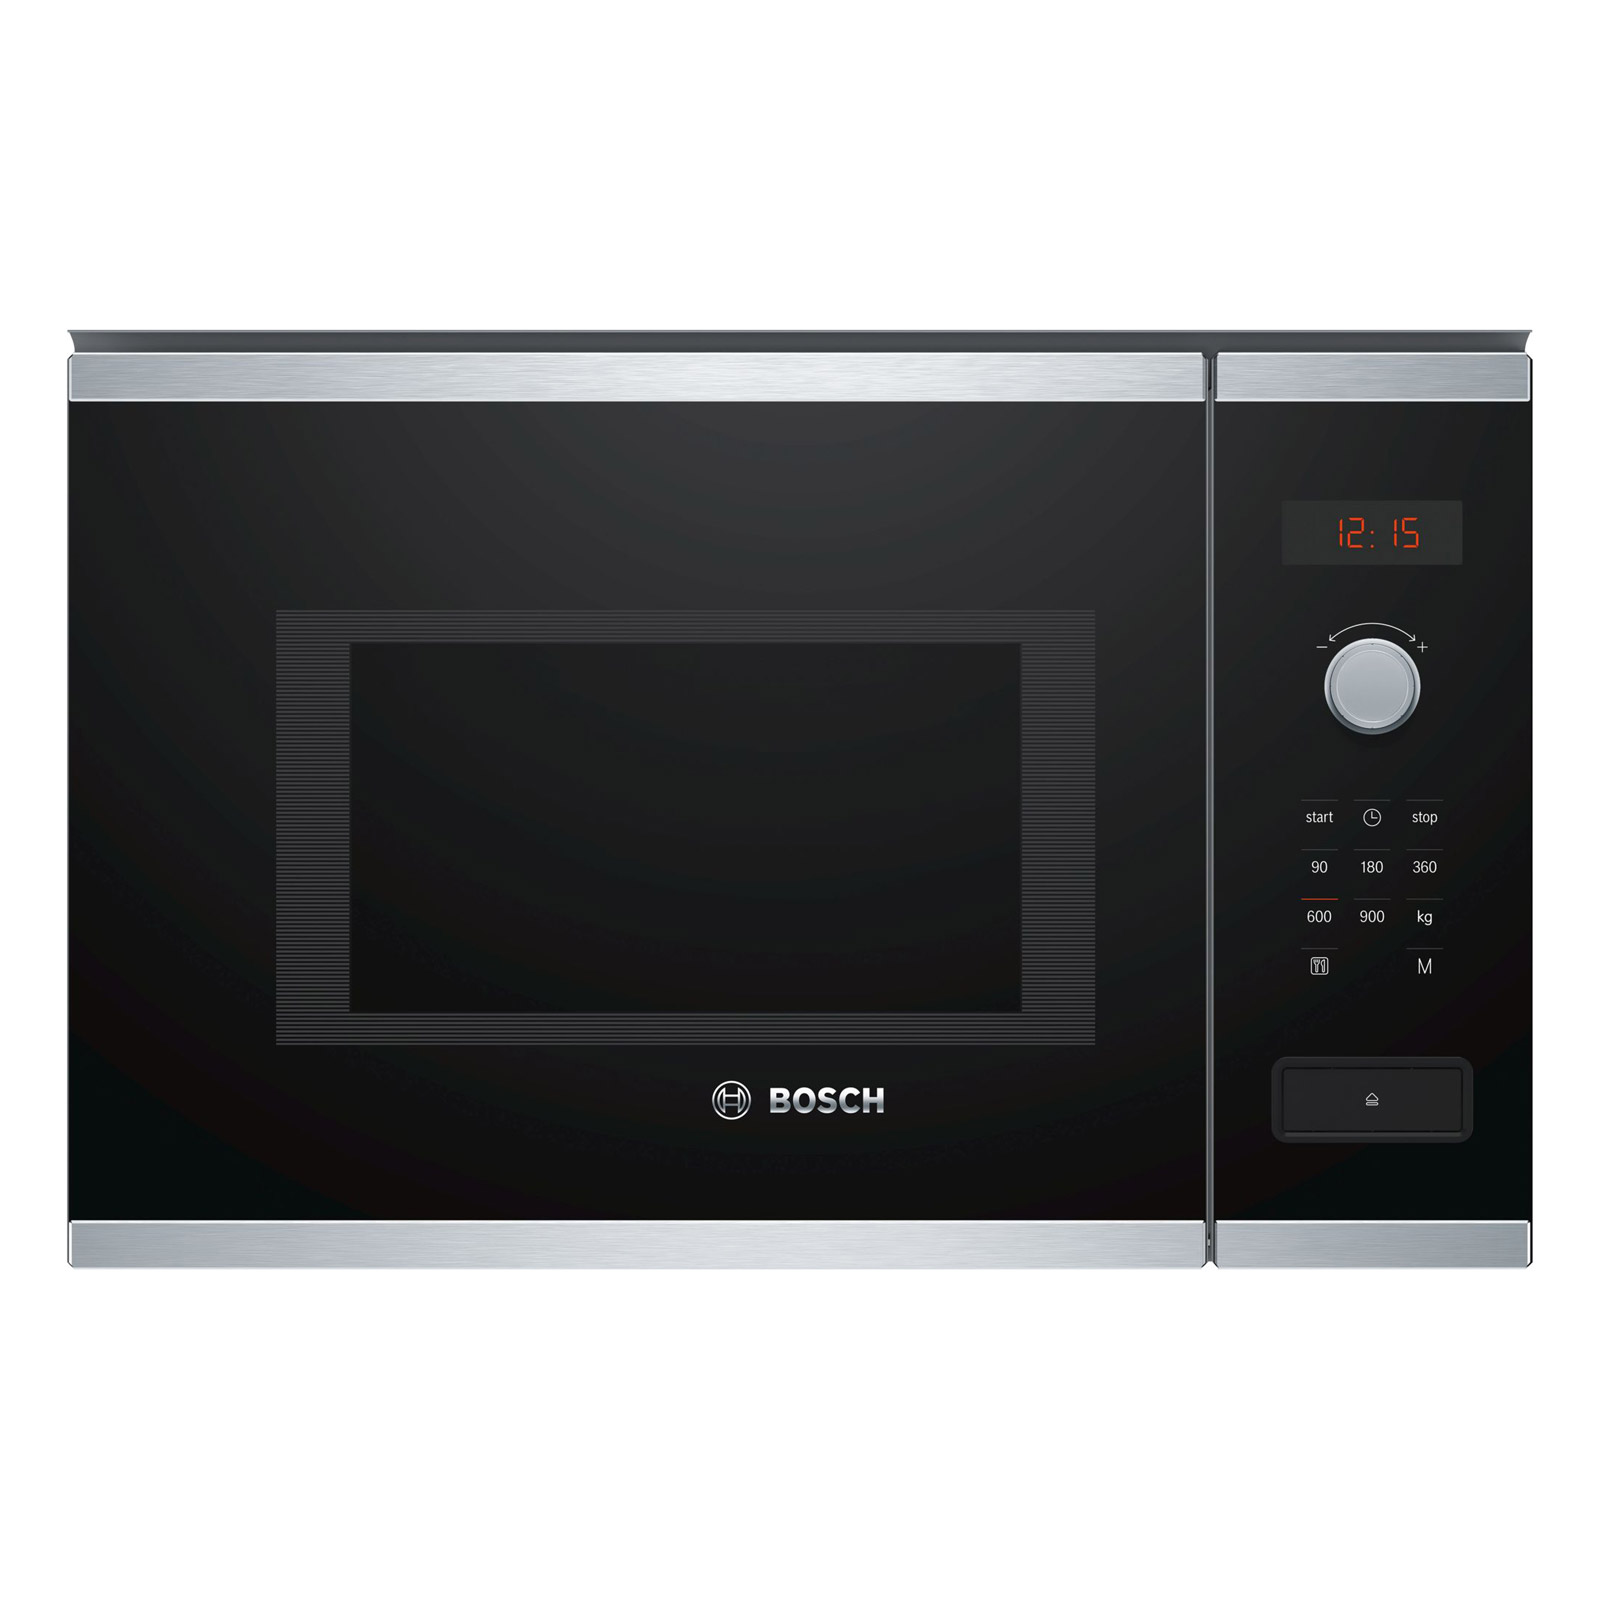 Image of Bosch BFL553MS0B Series 4 Built in Microwave Oven in Brushed Steel Bla